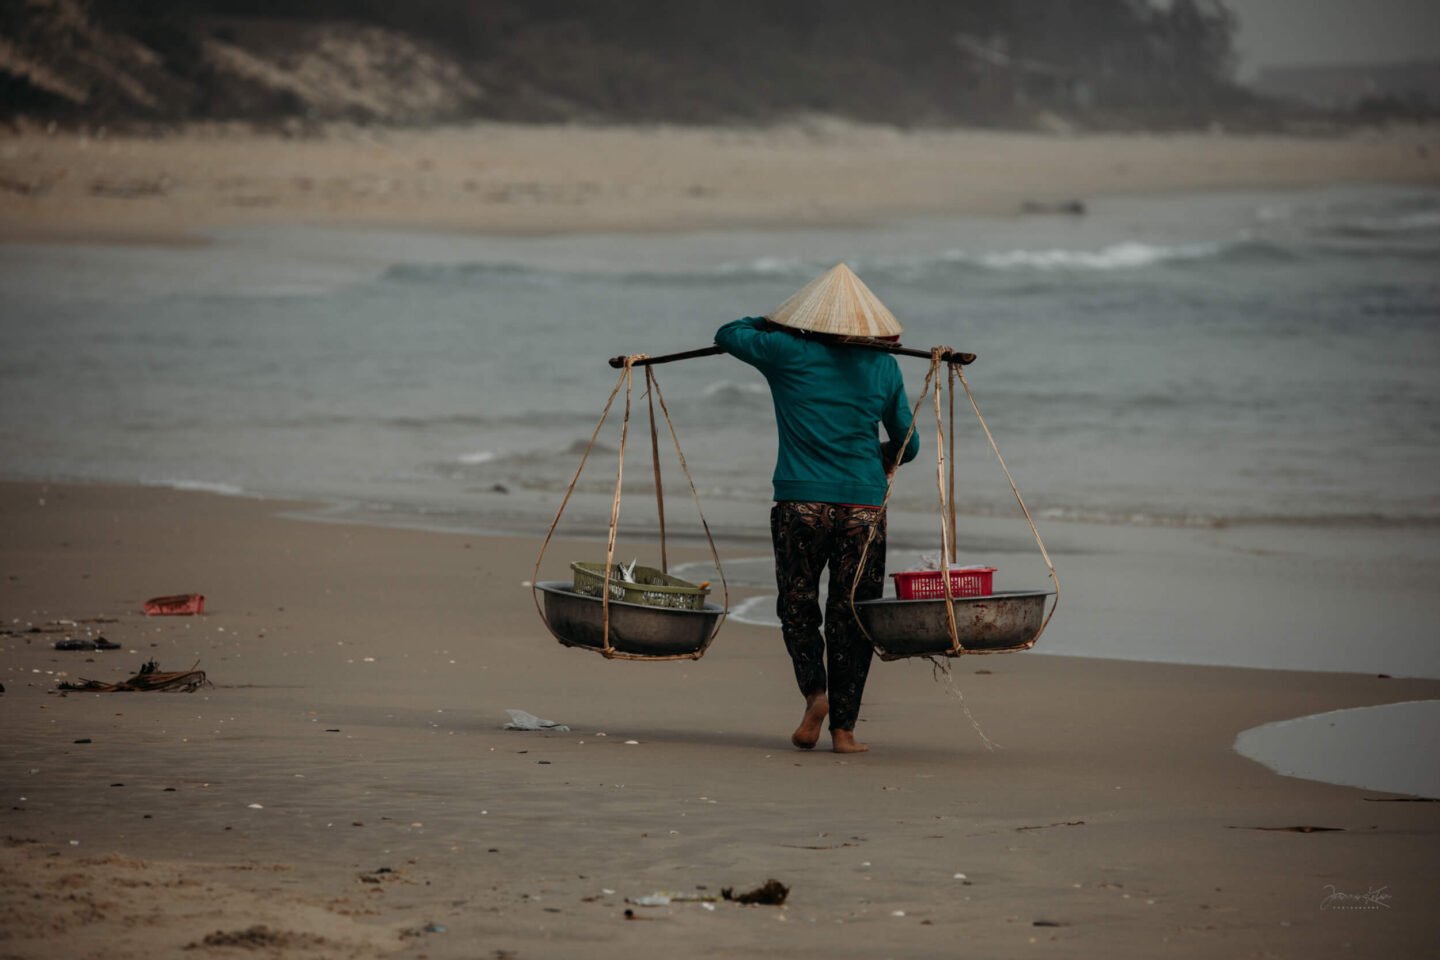 A woman carries fish to a local market, Hoi An area, Central Vietnam.